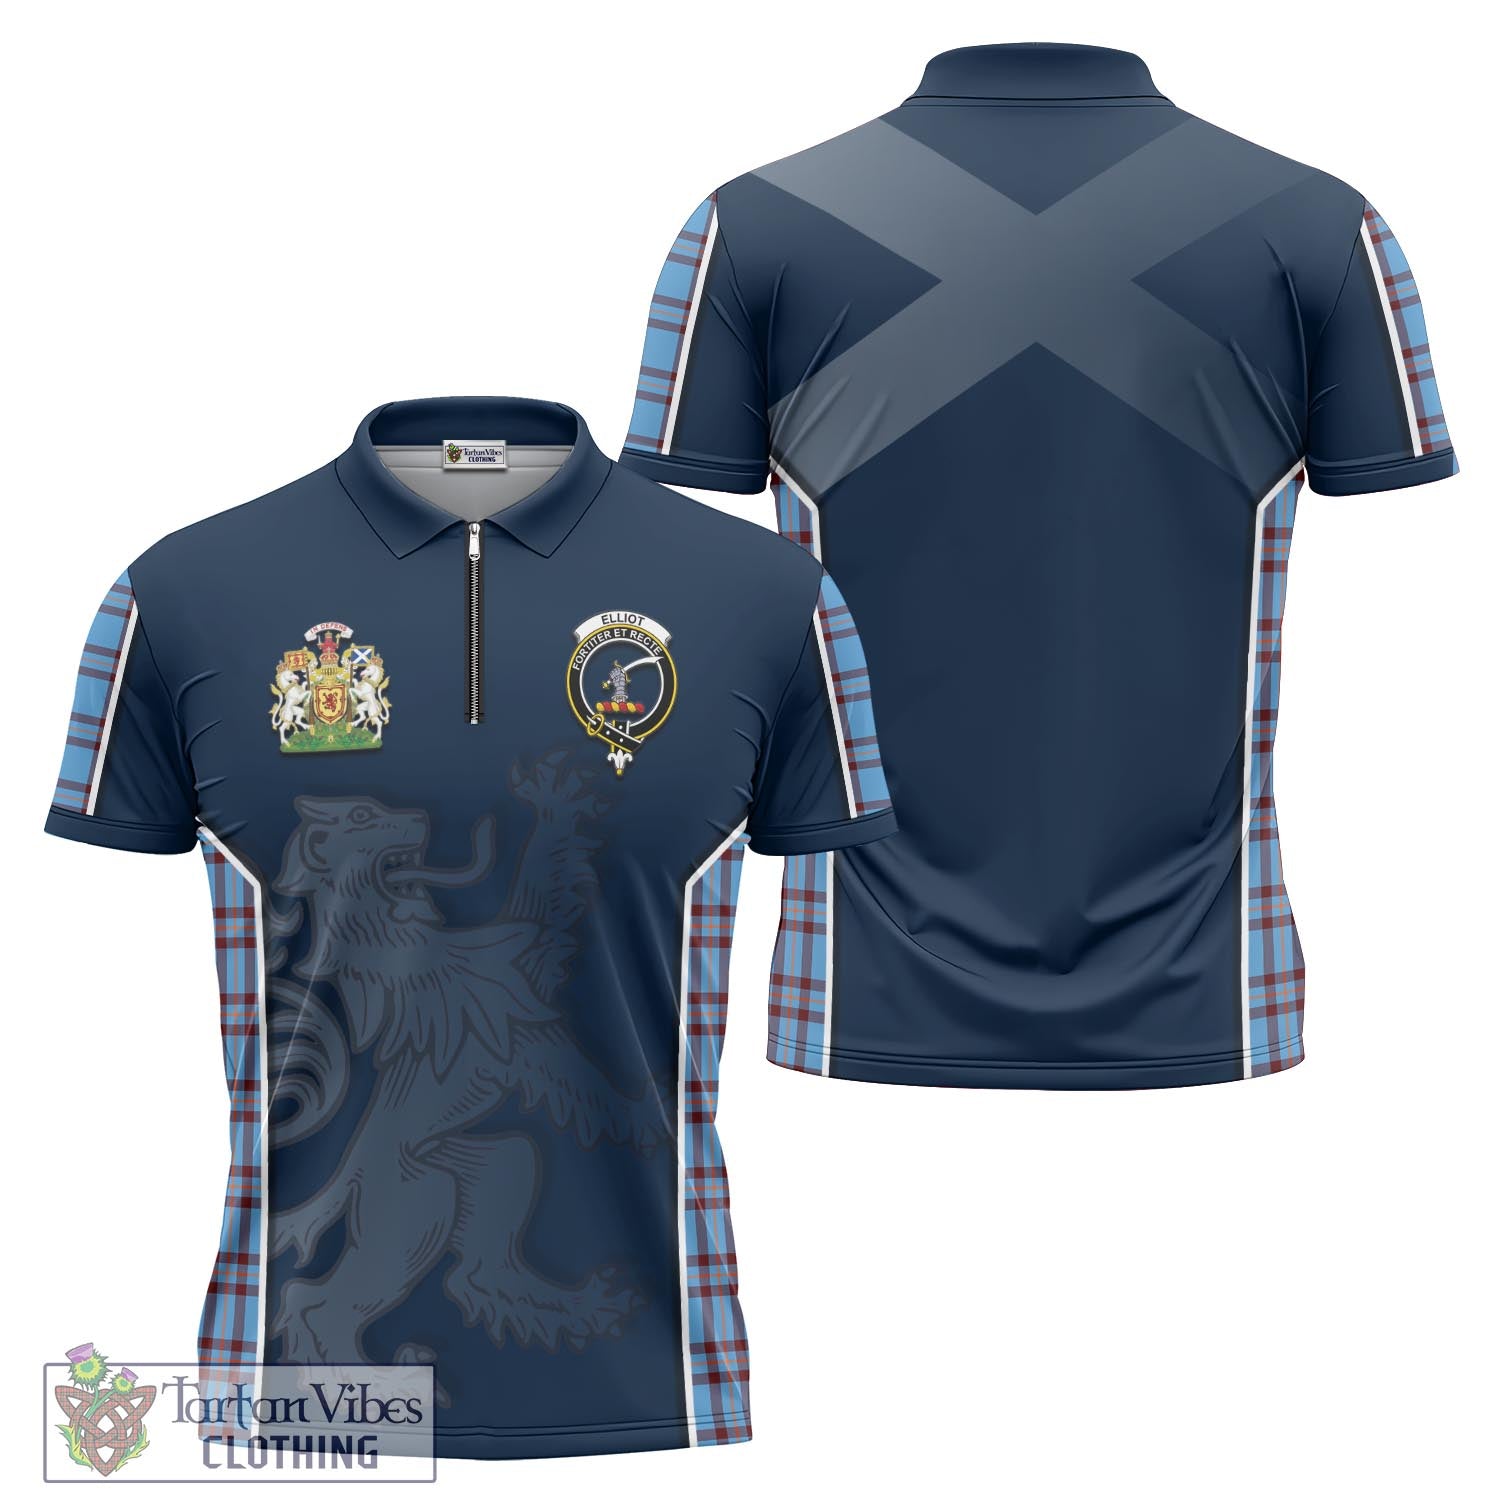 Tartan Vibes Clothing Elliot Ancient Tartan Zipper Polo Shirt with Family Crest and Lion Rampant Vibes Sport Style